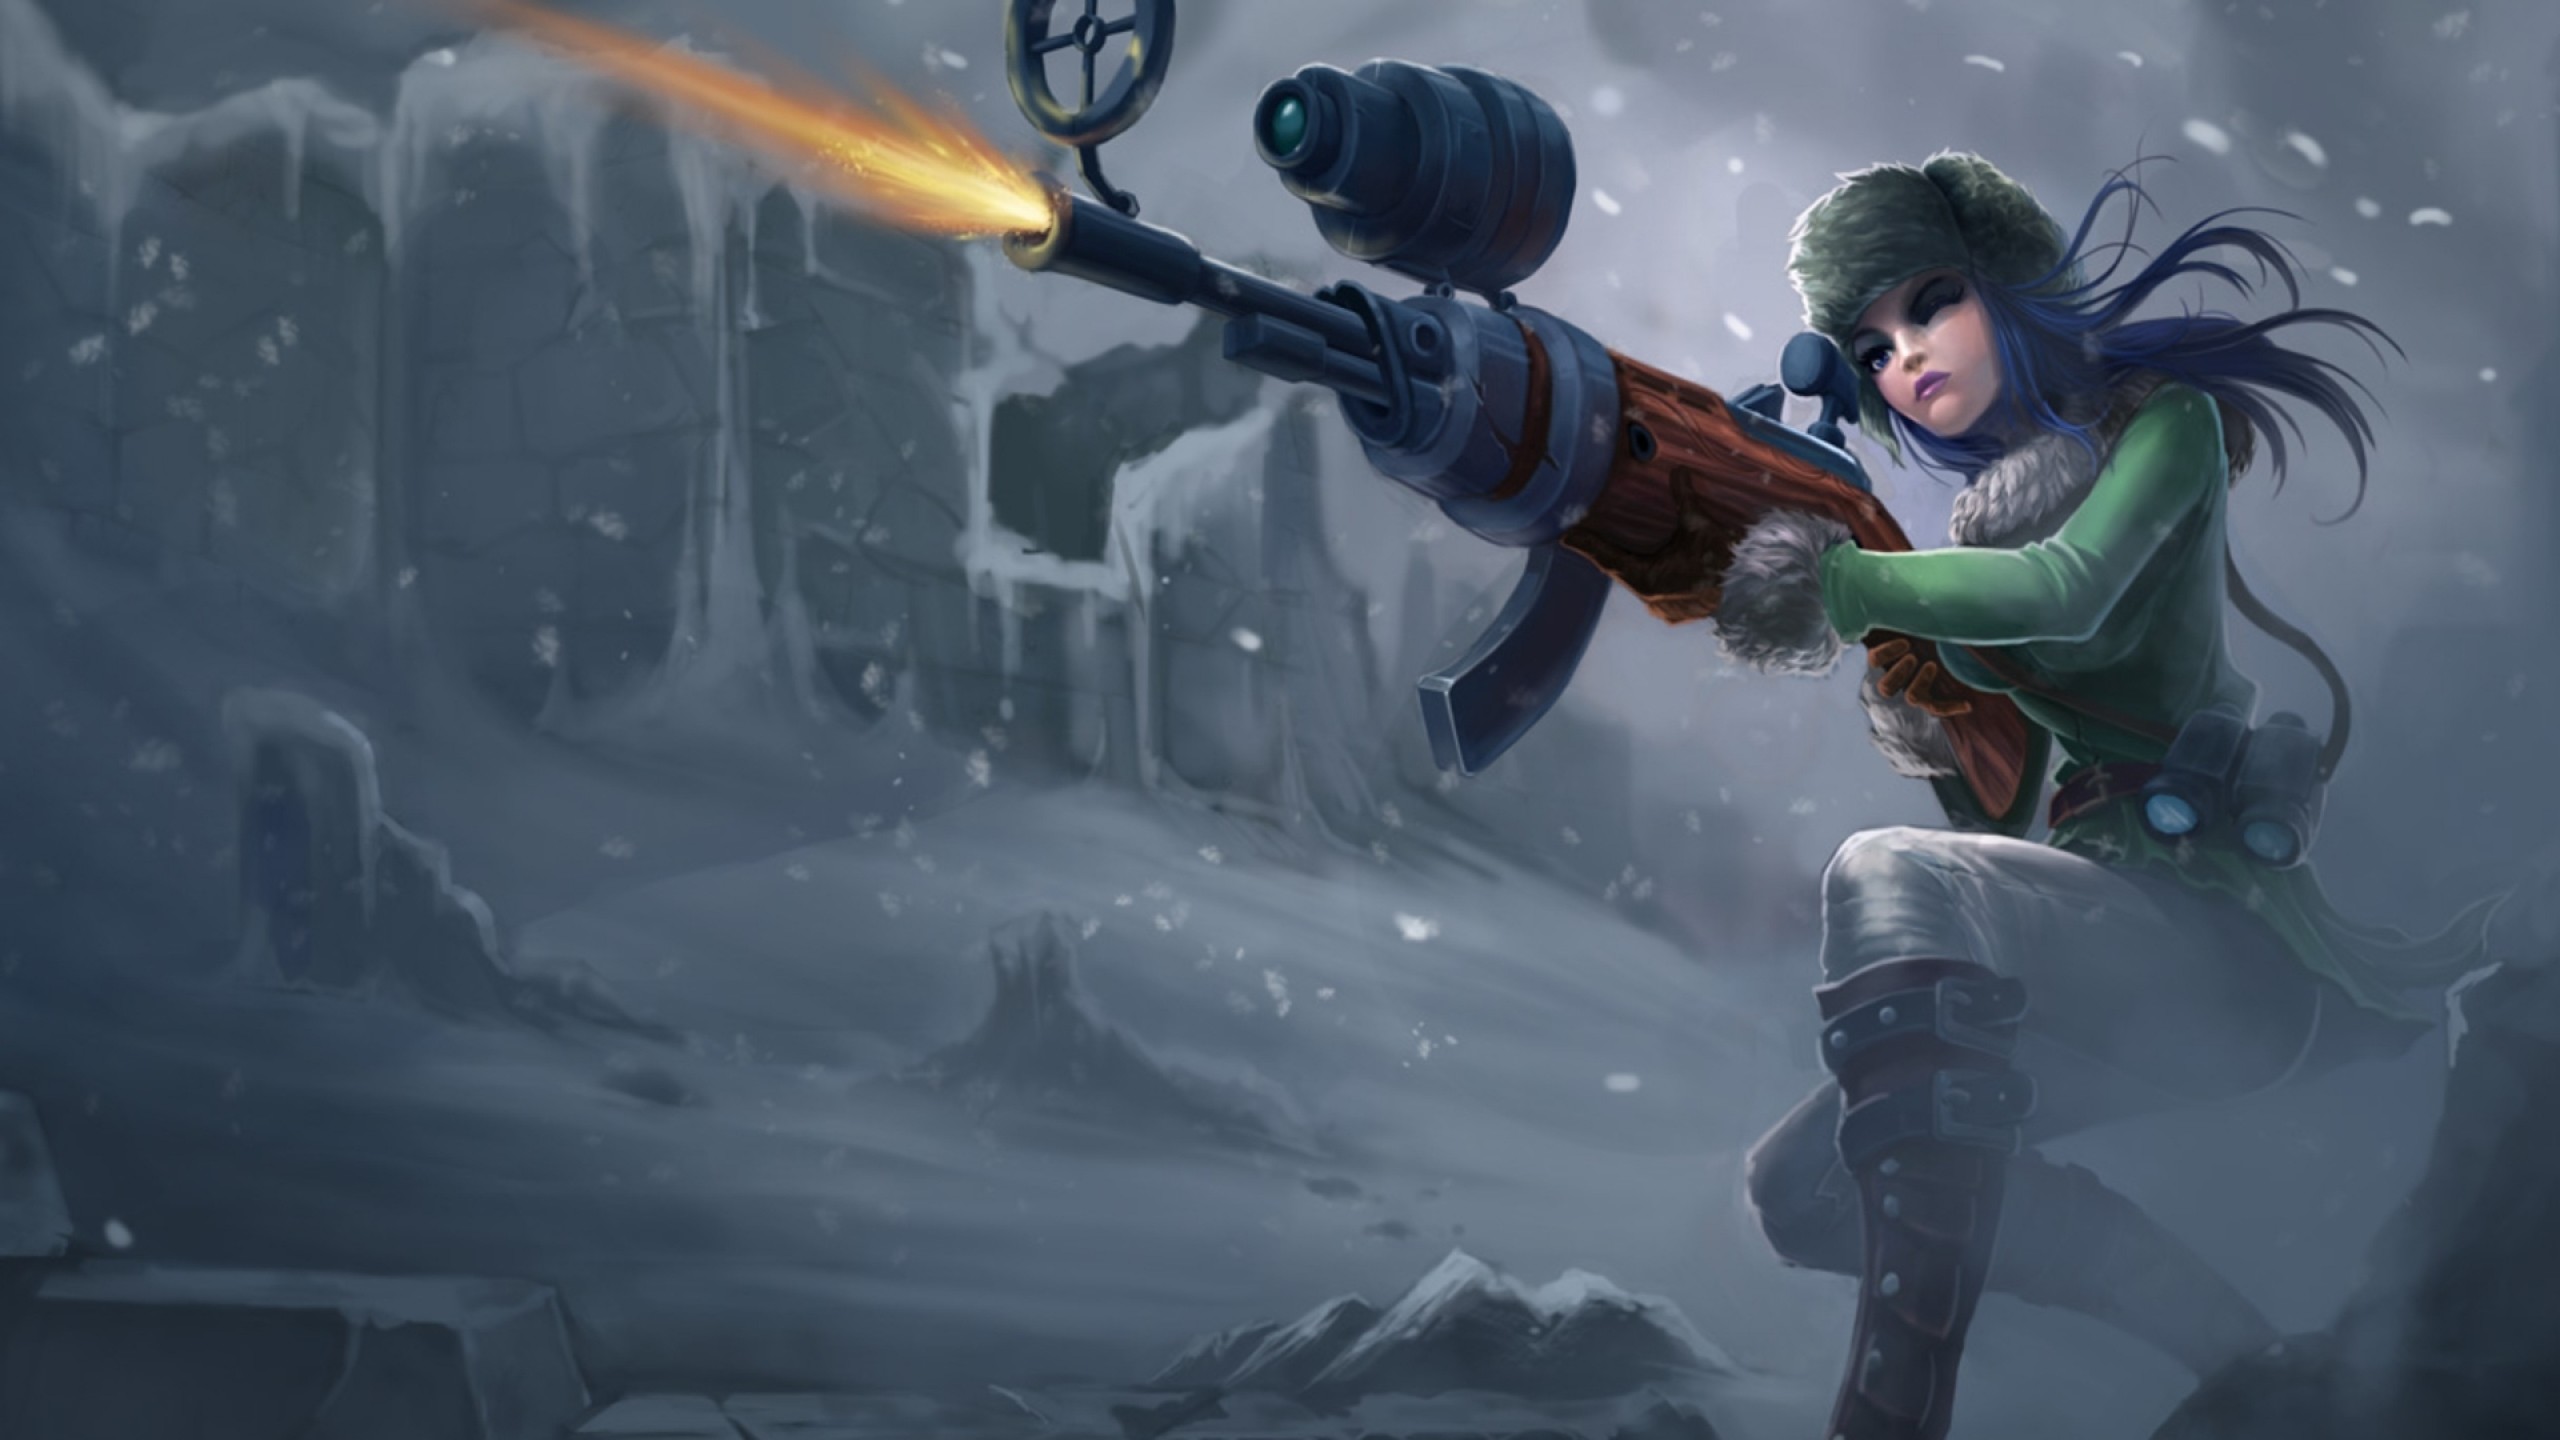 2560x1440 winter snow league of legends illustrations girls with guns caitlyn the  sheriff of piltover 1920x Wallpaper